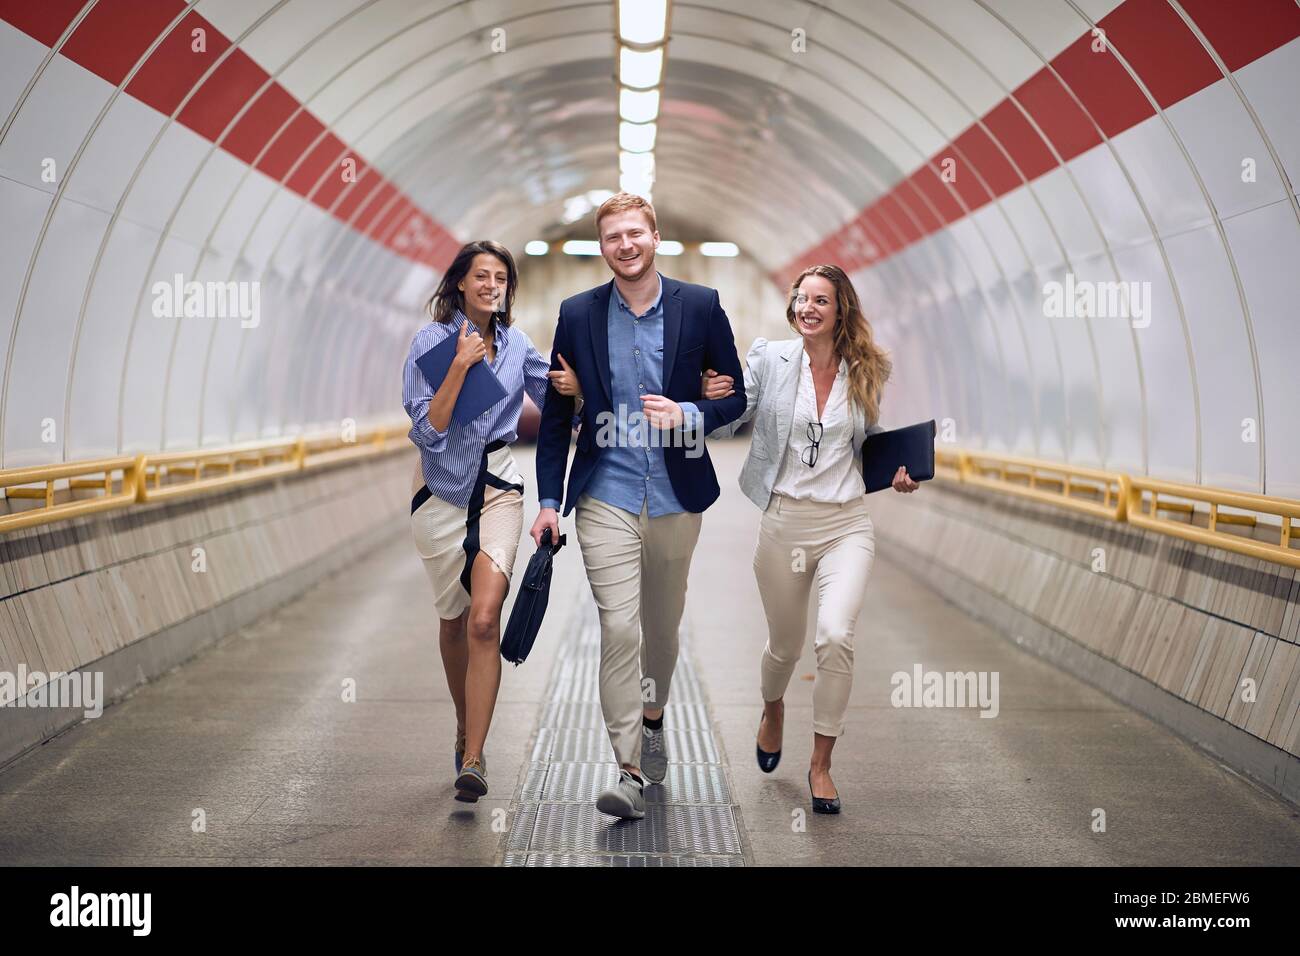 Successful business people In the subway station.Young people walking to platform at train station.Urban lifestyle and transportation concepts. Stock Photo